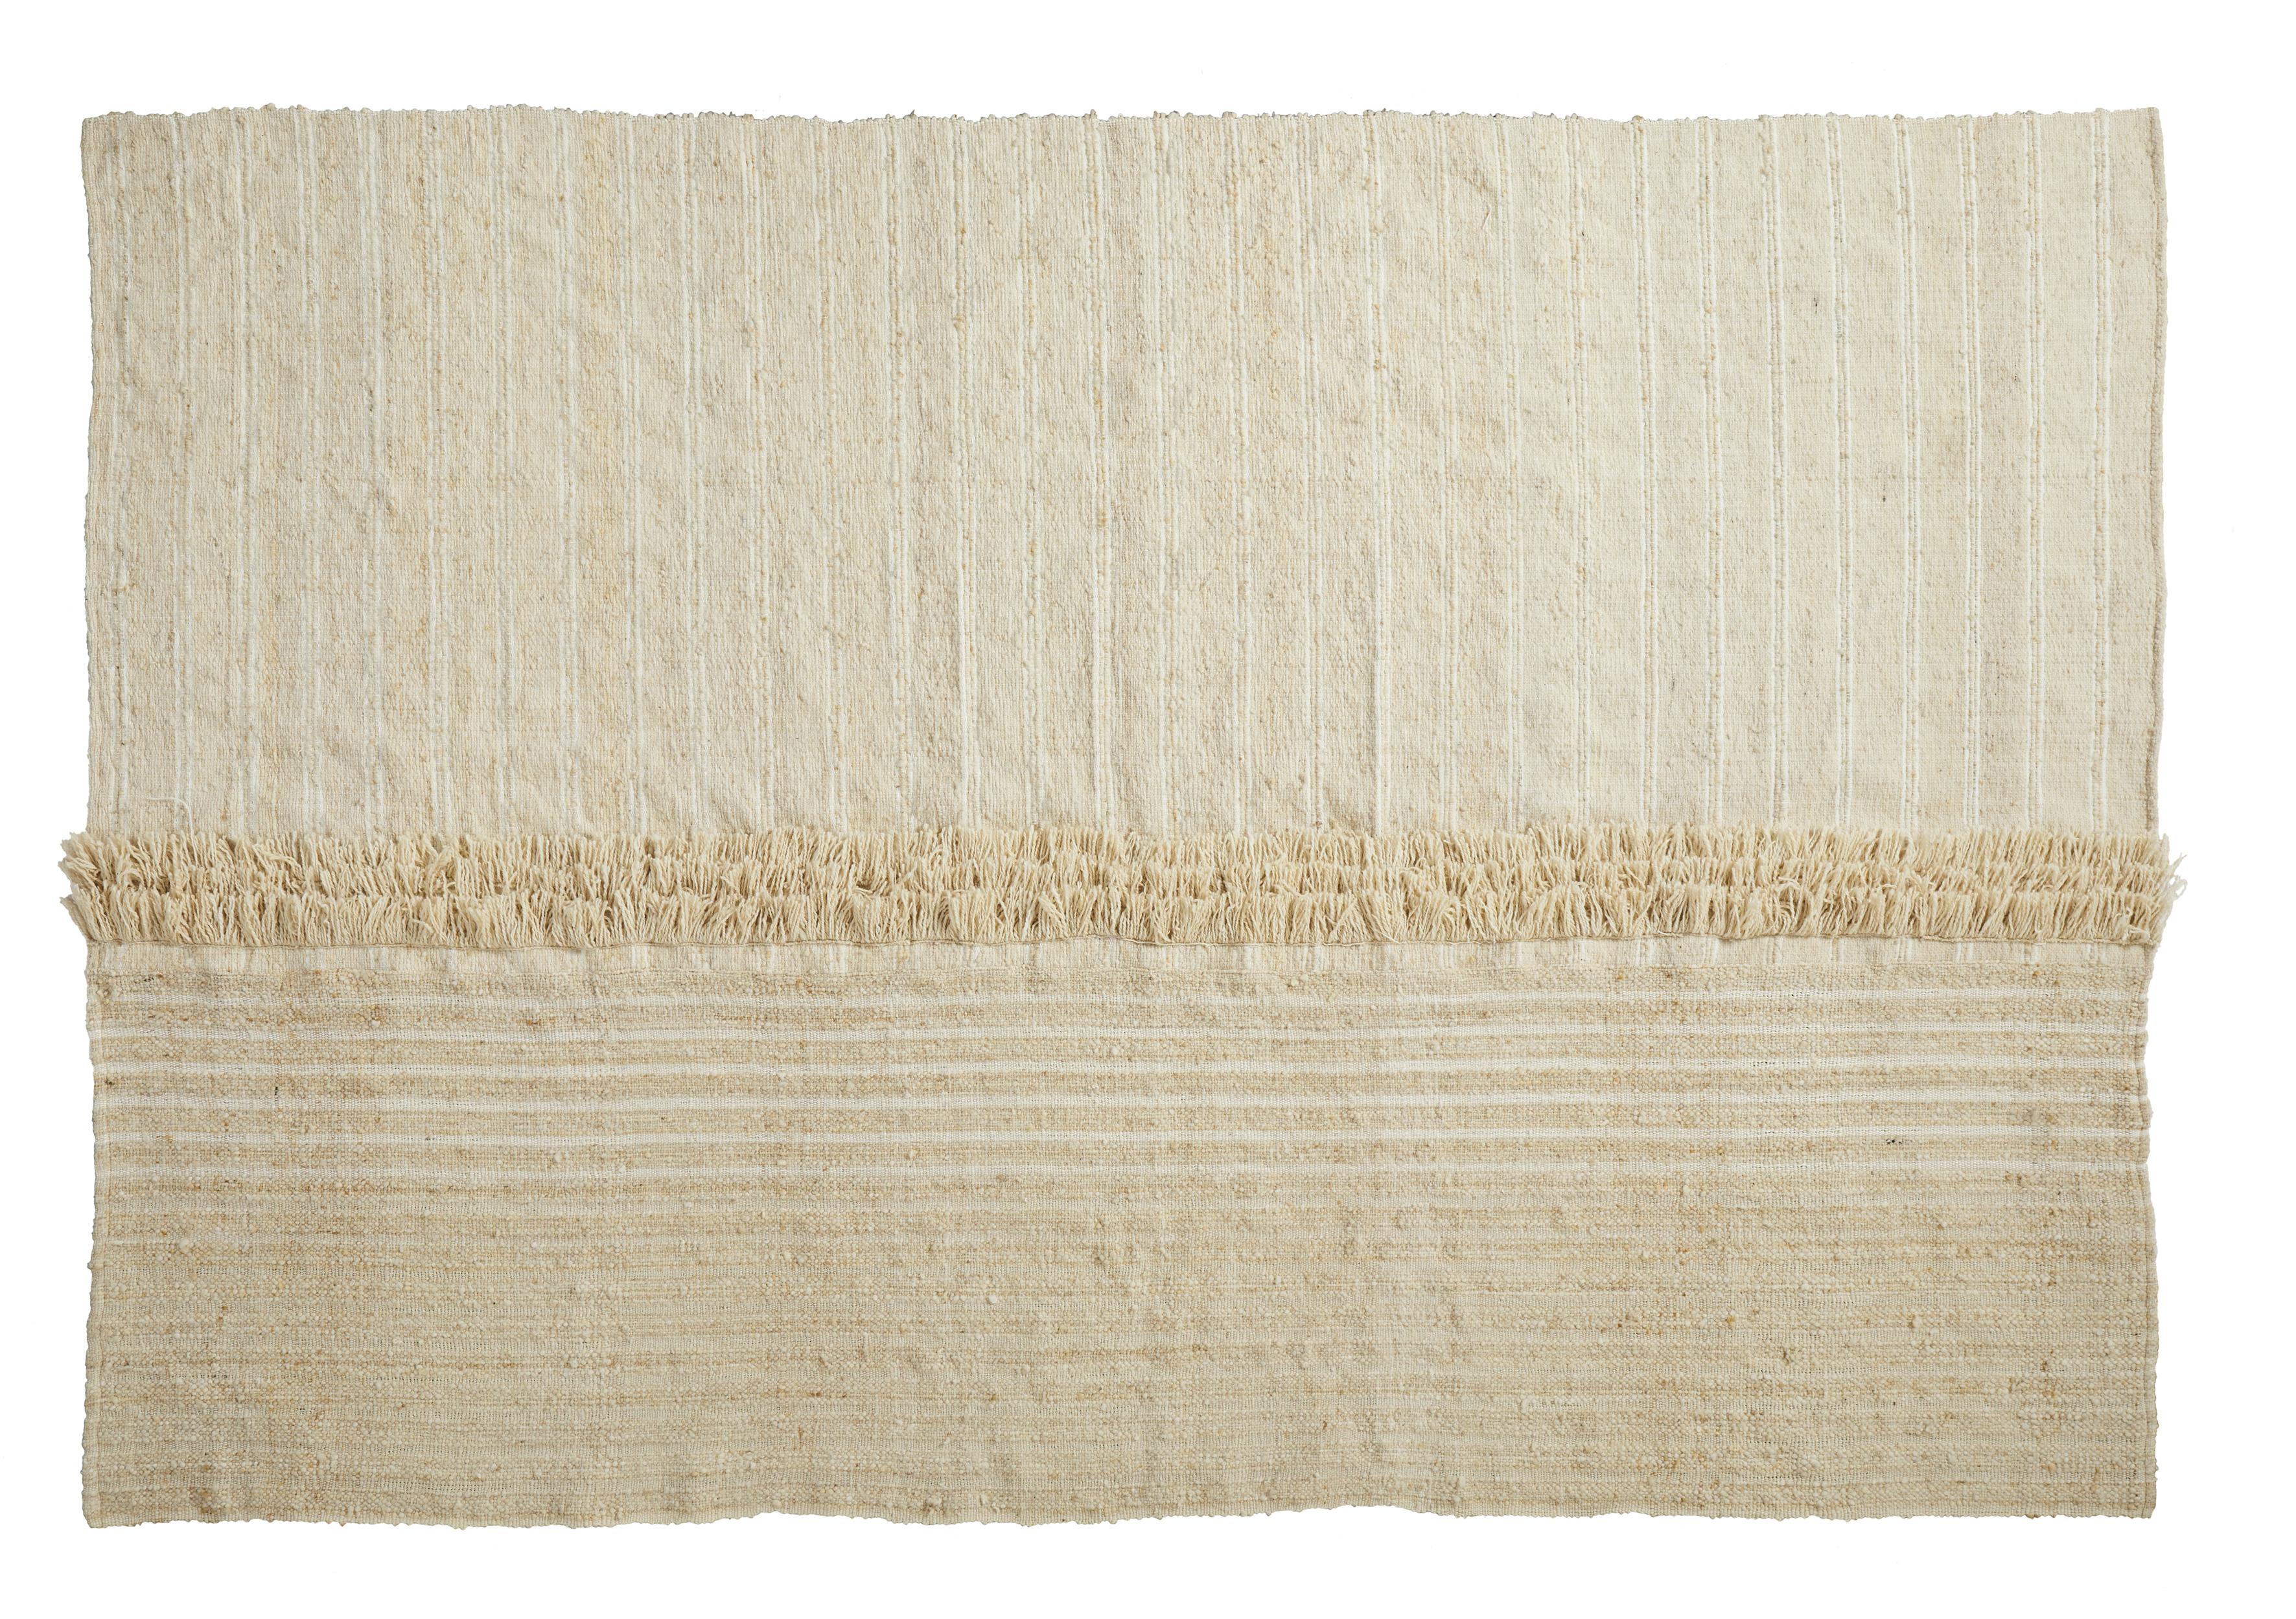 Linea 2 small subas rug by Sebastian Herkner
Materials: 100% natural virgin wool. 
Technique: Naturally dyed fibers. Hand-woven in Colombia.
Dimensions: W 160 x L 220 cm 
Available in colors: karo, linea 1, linea 2, moton, oruga. 

The Subas